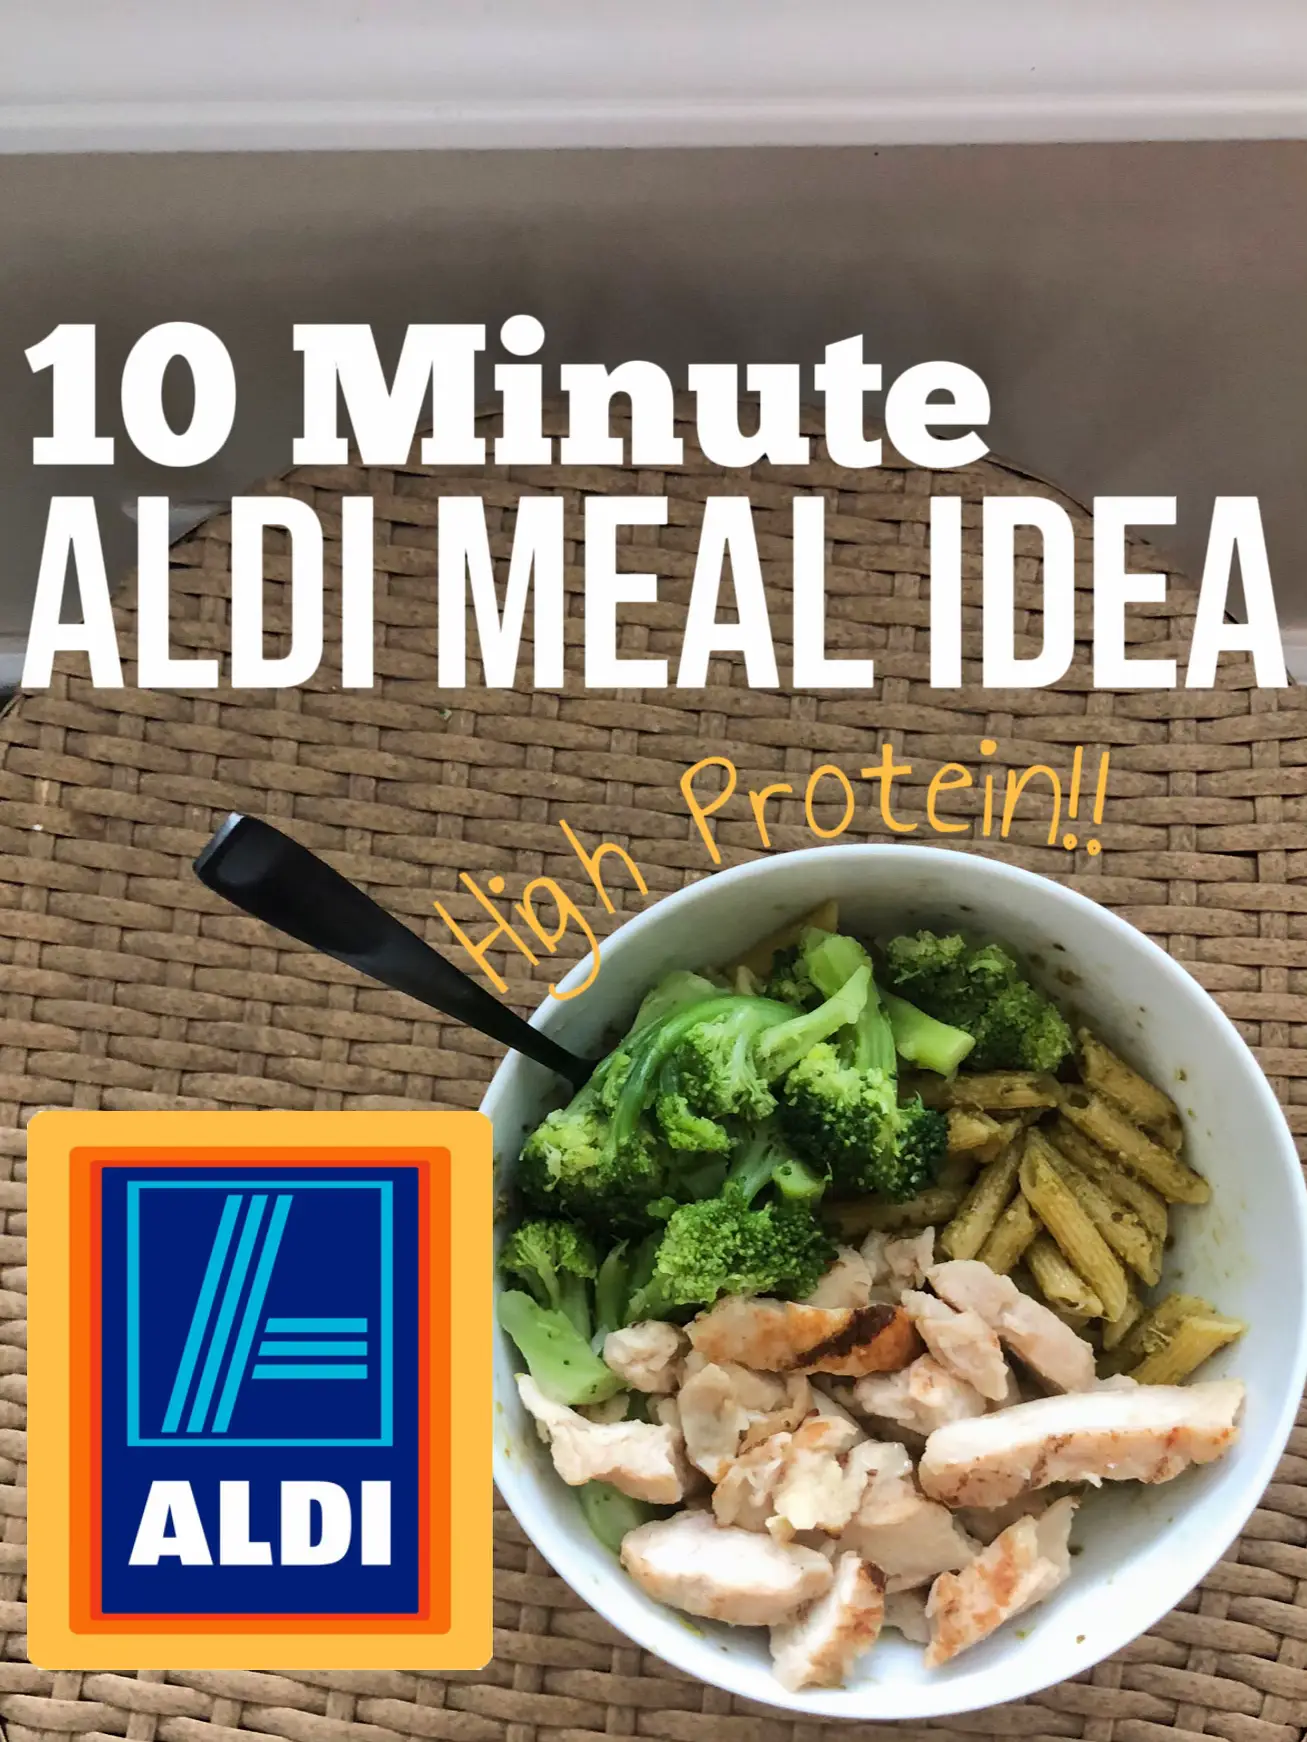 Gut Healthy Finds at Aldi 😇  Gallery posted by Kristina Dunn